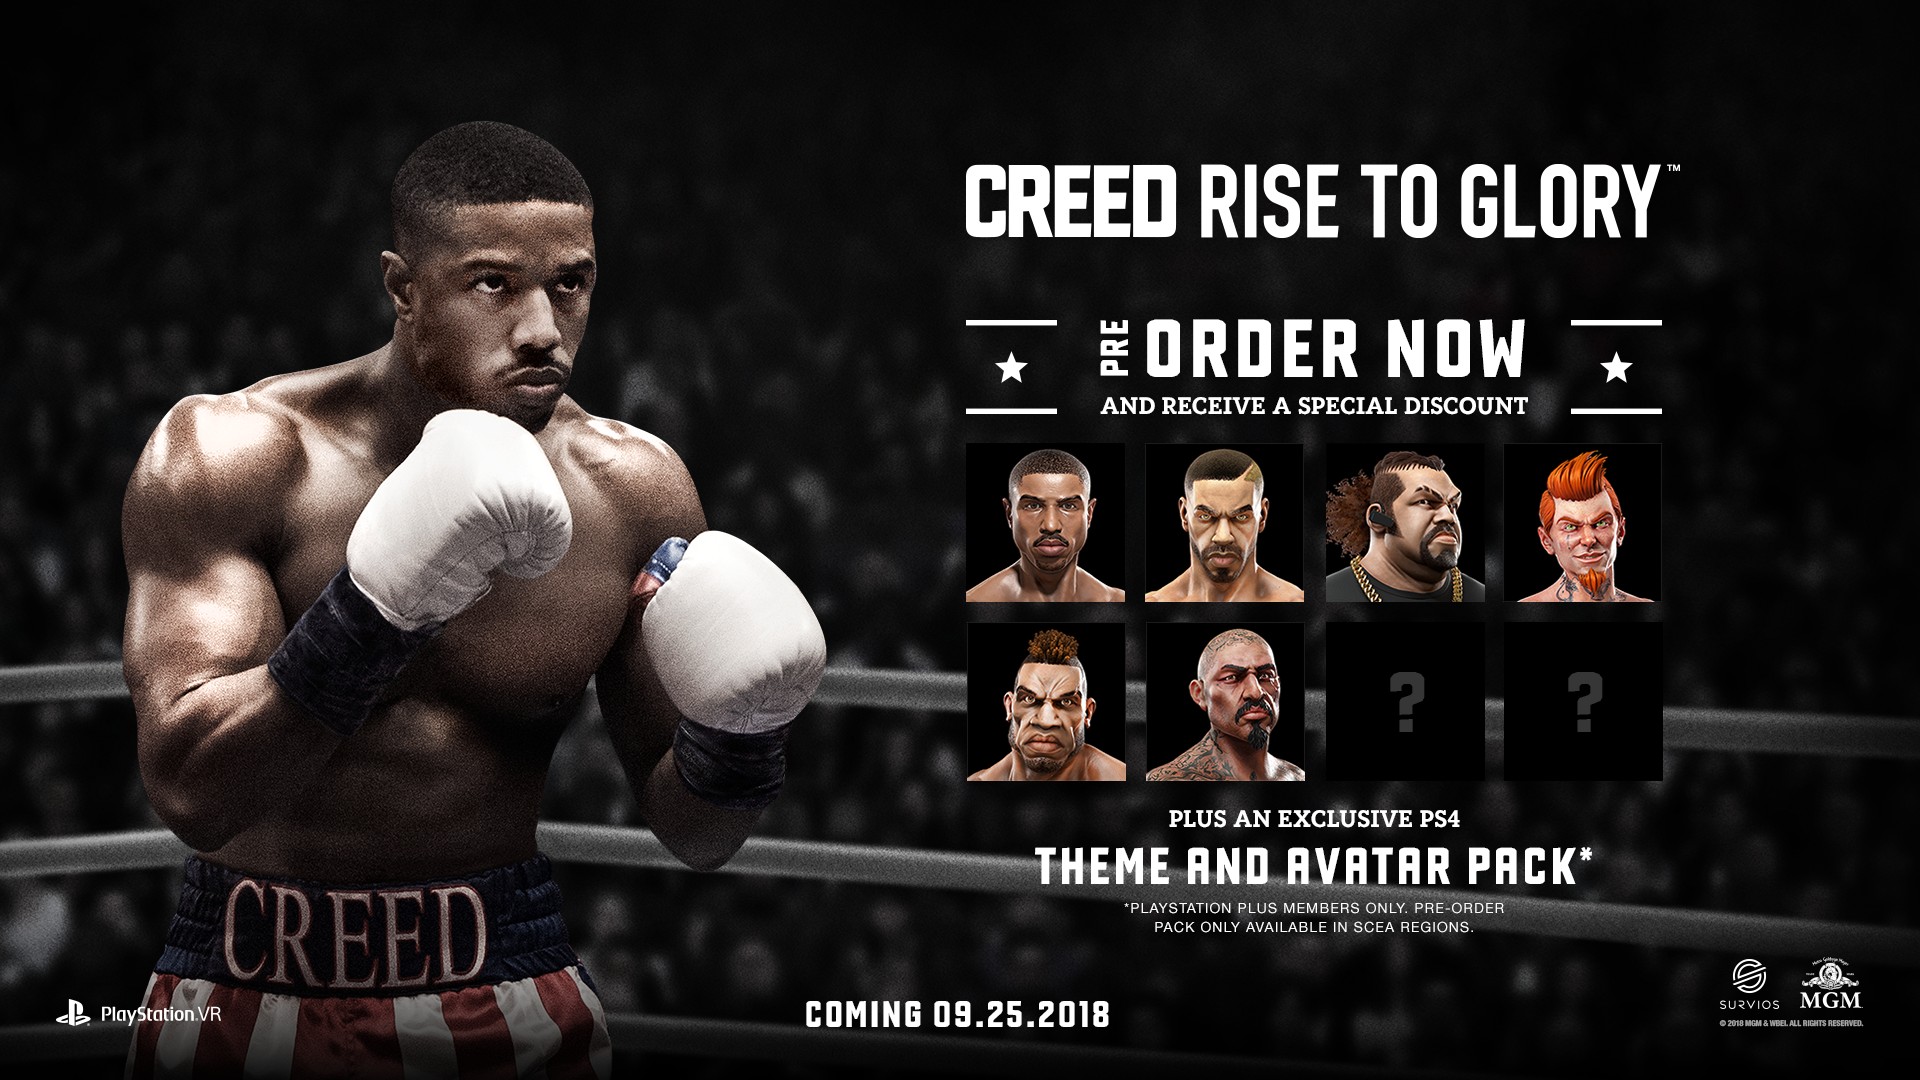 Rise to glory vr. Creed VR игра. Creed Rise to Glory ps4. Creed: Rise to Glory™ VR. Бокс VR Creed.